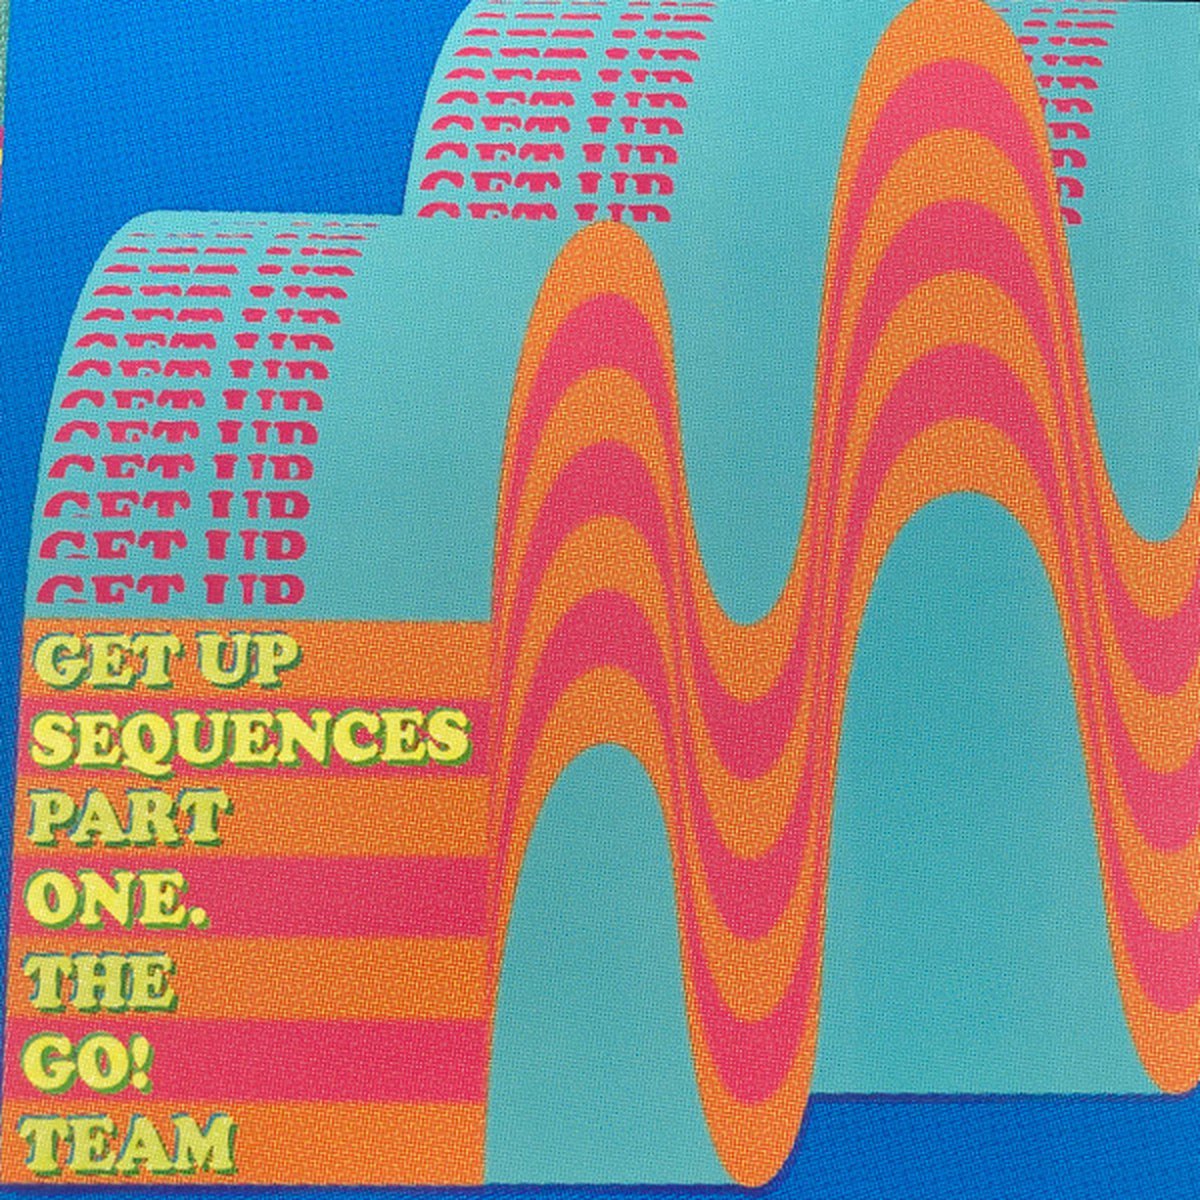 Get Up Sequences Part One - Limited Edition - Turquoise Coloured Vinyl